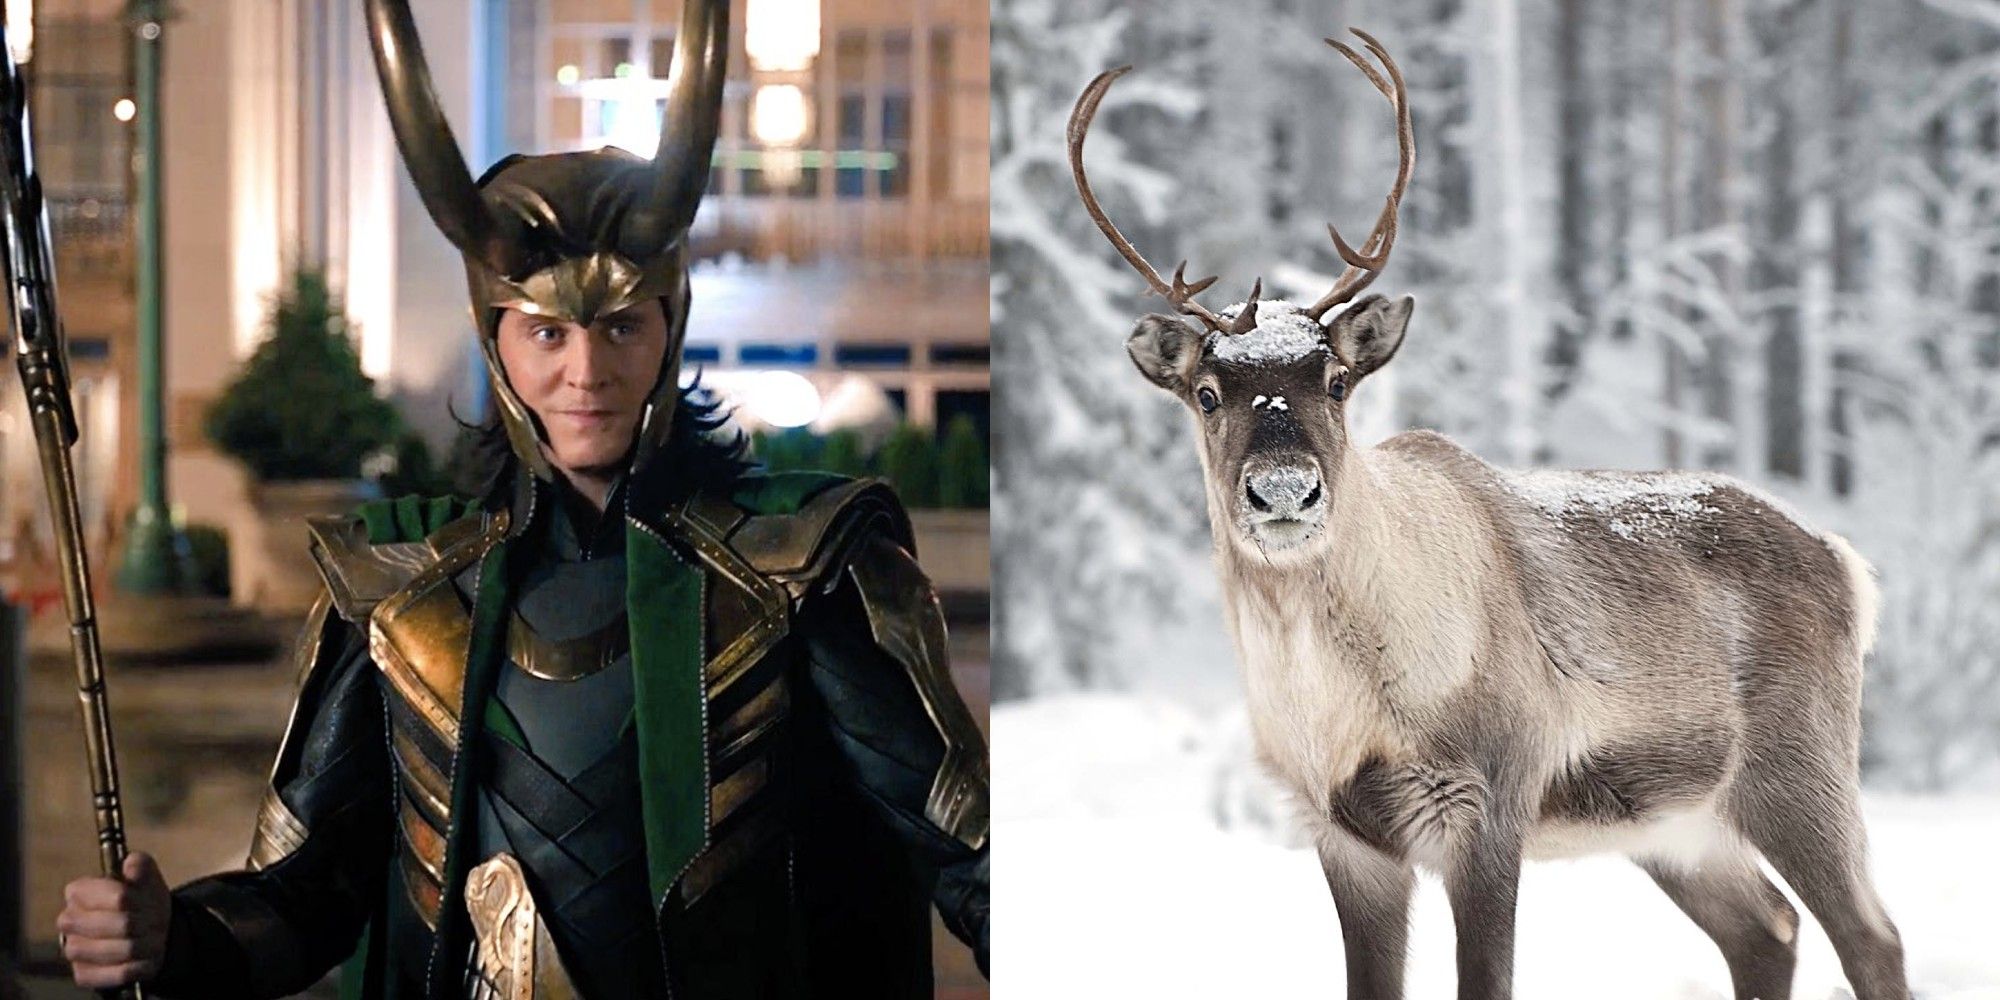 Left to right: Loki in Avengers and a Reeinder